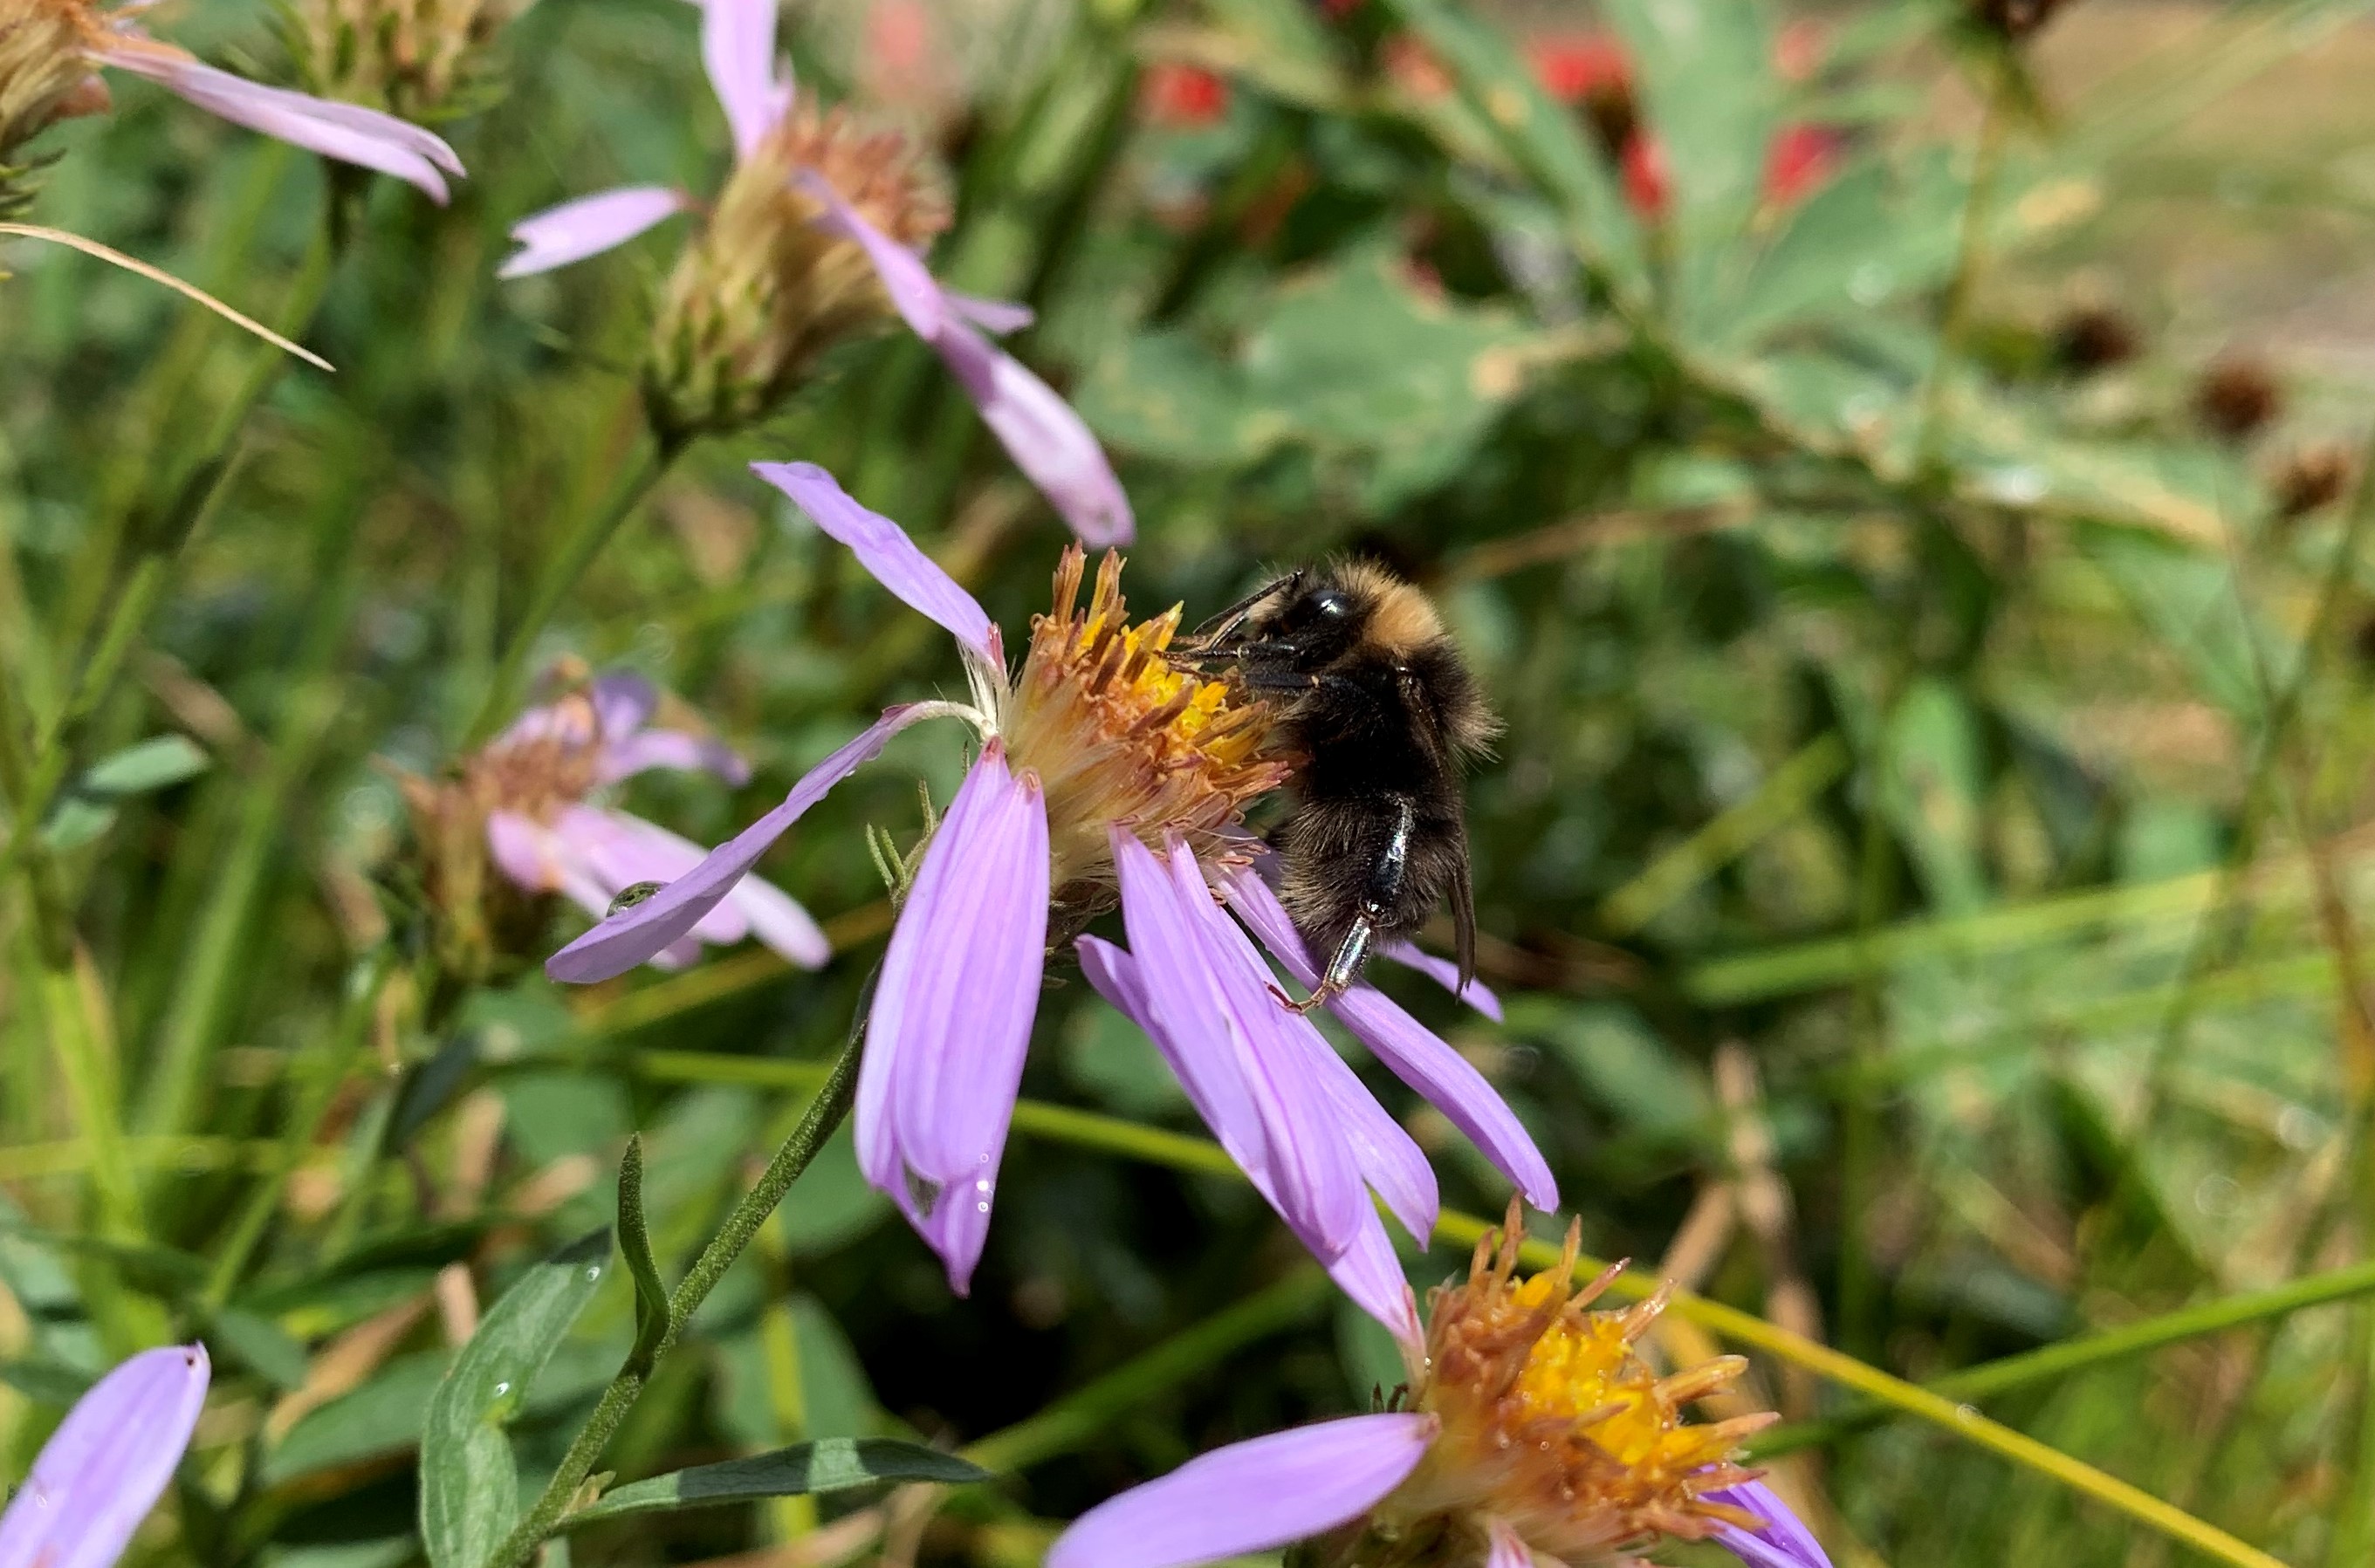 A bumble bee with a yellow head foraging on a purple and yellow aster flower